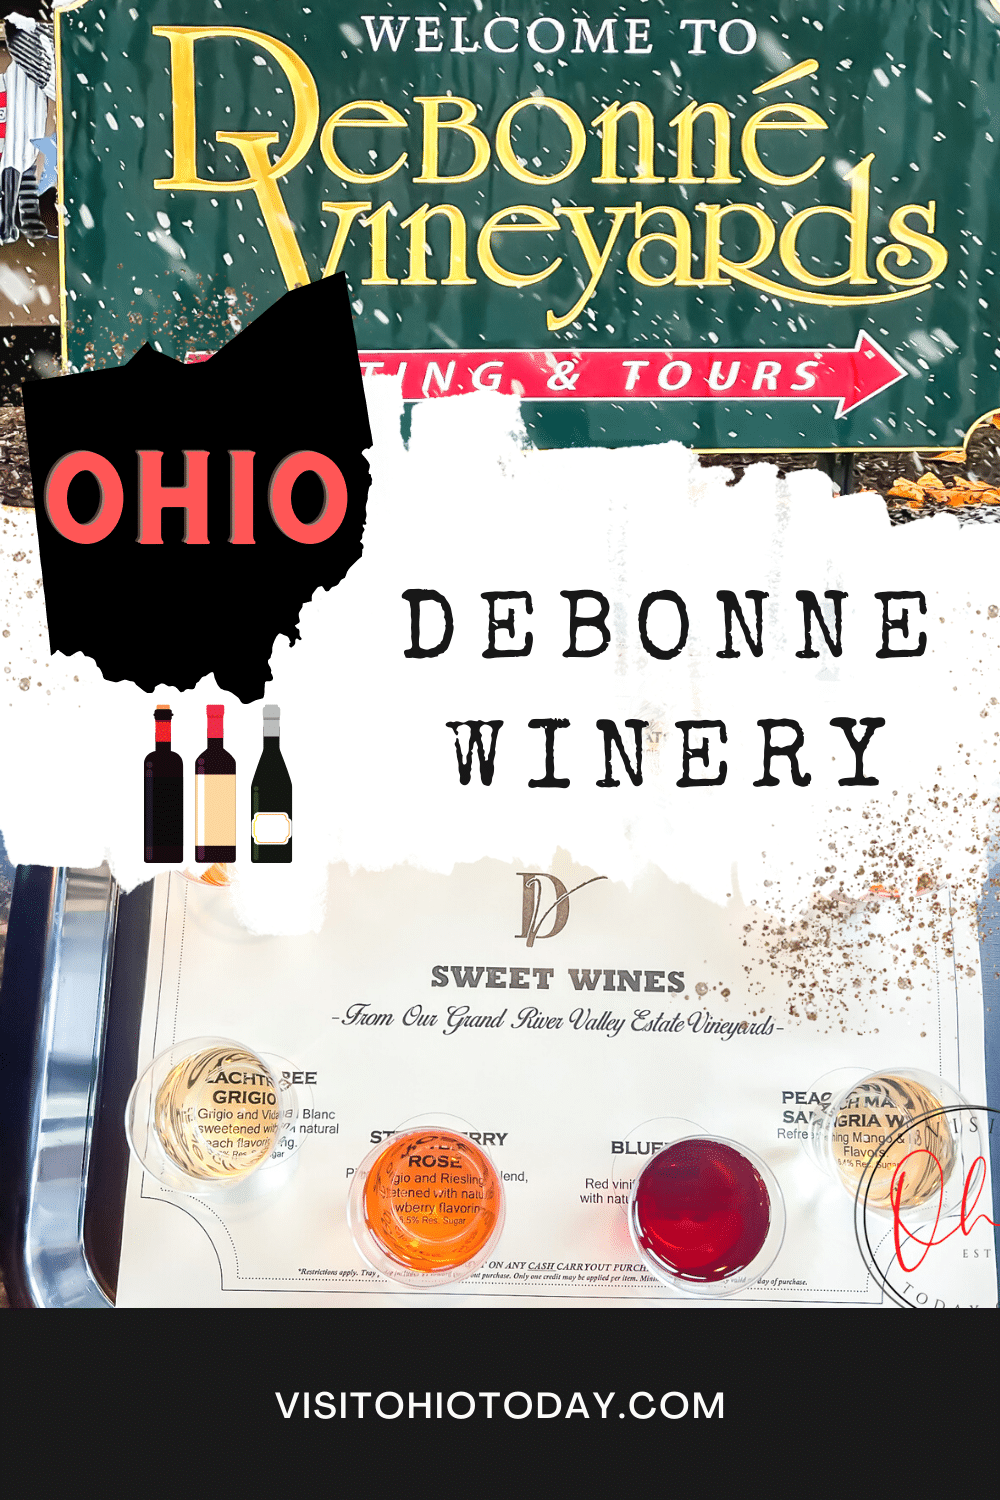 Debonne Winery is an Ohio Winery with a long history of winemaking. Debonne Winery offers its award winning ice wines, Riesling and more, year round.  #debonnewinery #ohiowines #ohiowinery #debonne